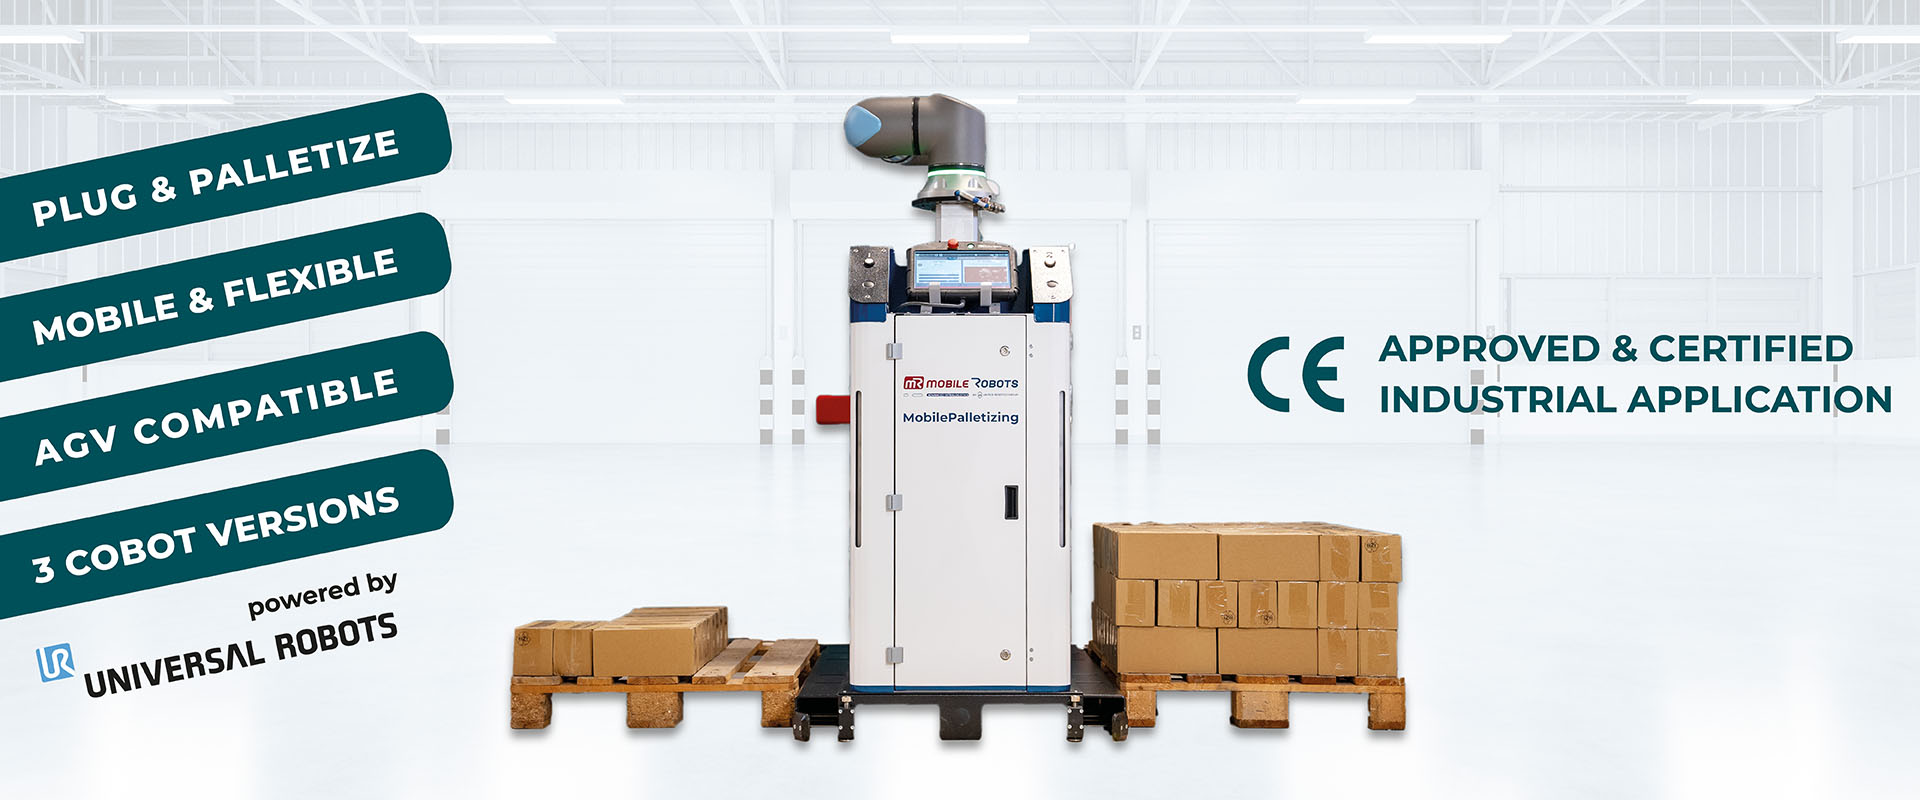 The 'plug & palletizing' solution MobilePalletizing by mR MOBILE ROBOTS, combined with a Universal Robots Cobot, is a CE-certified industrial application.